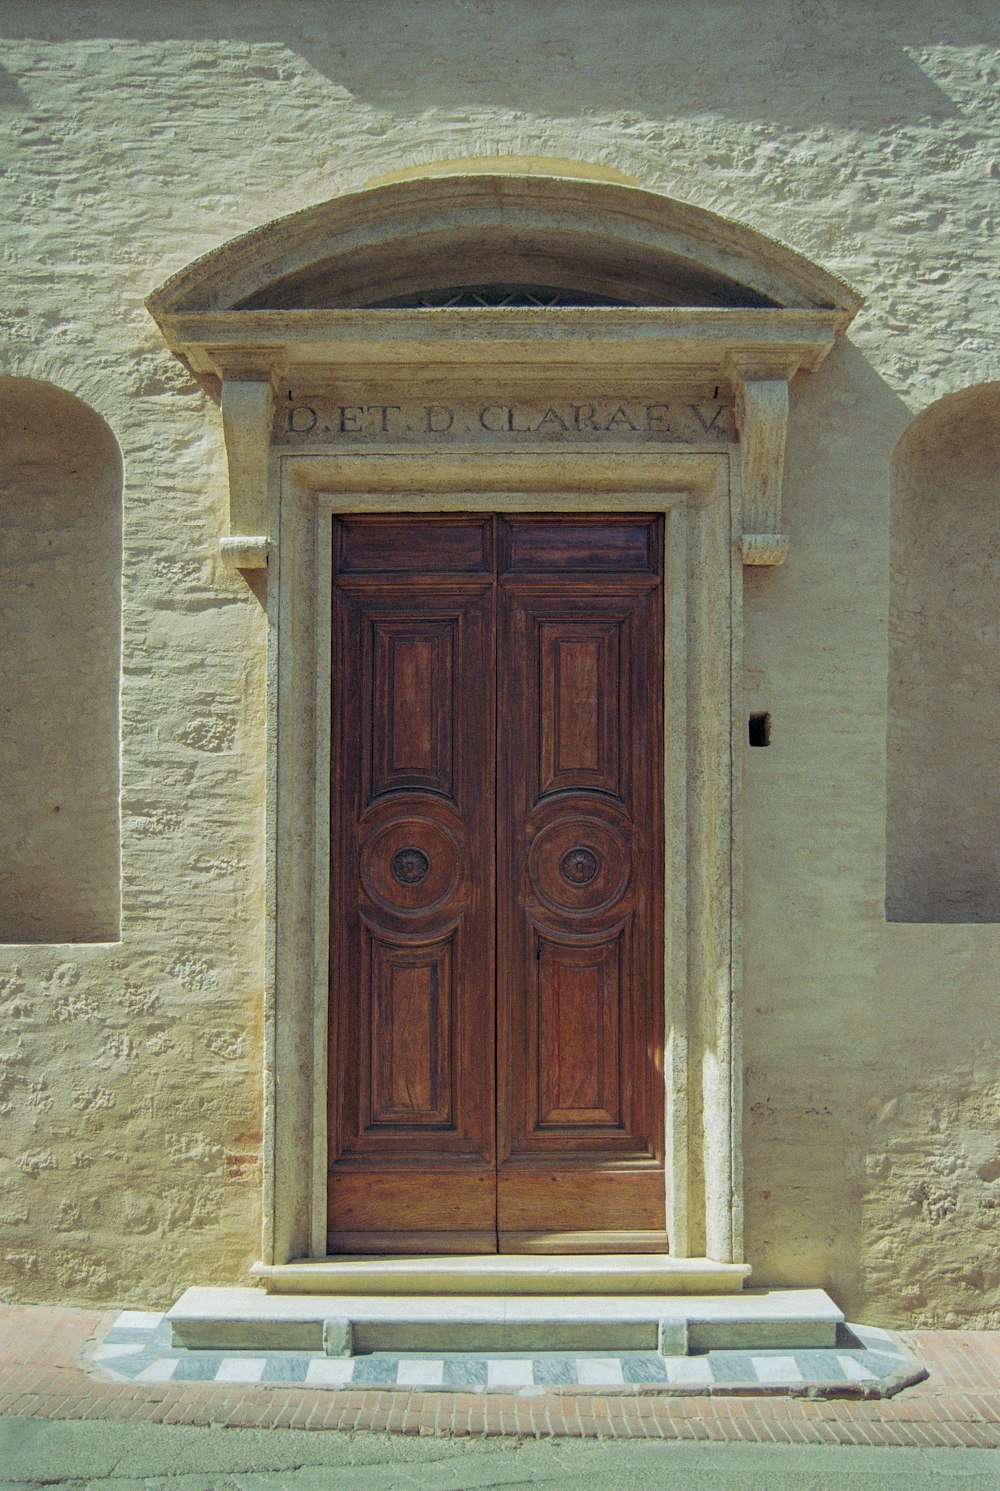 a large wooden door sitting in front of a stone building